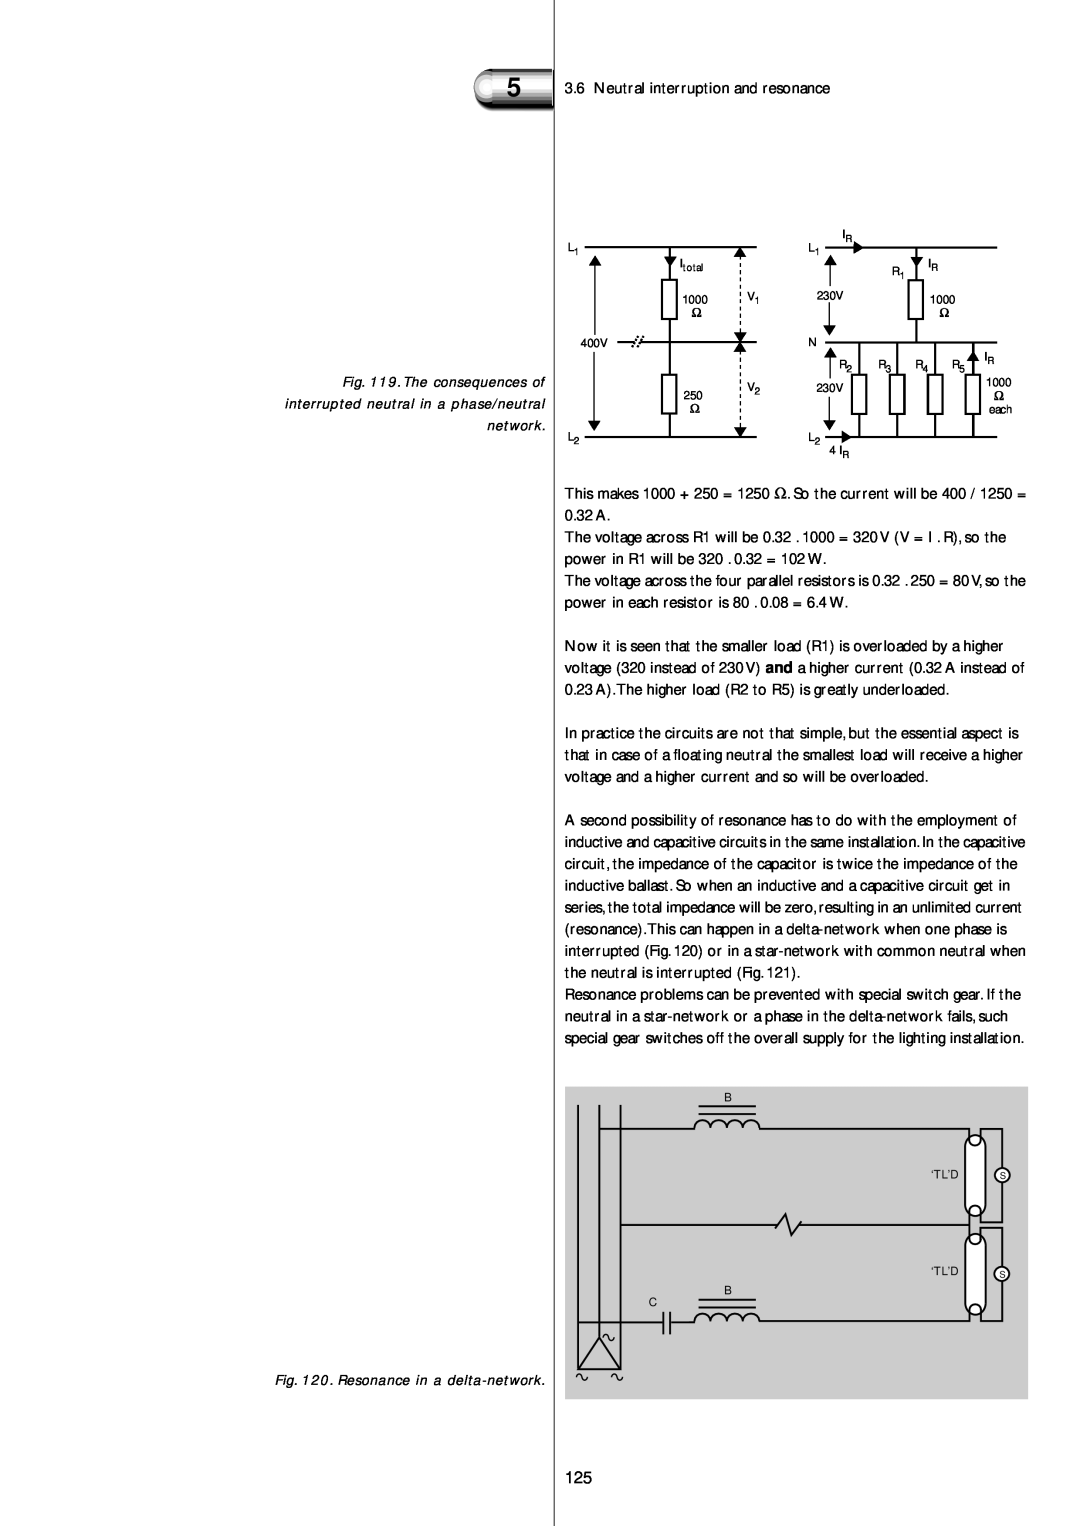 Philips Electromagnetic Lamp manual Resonance in a delta-network, Neutral interruption and resonance 